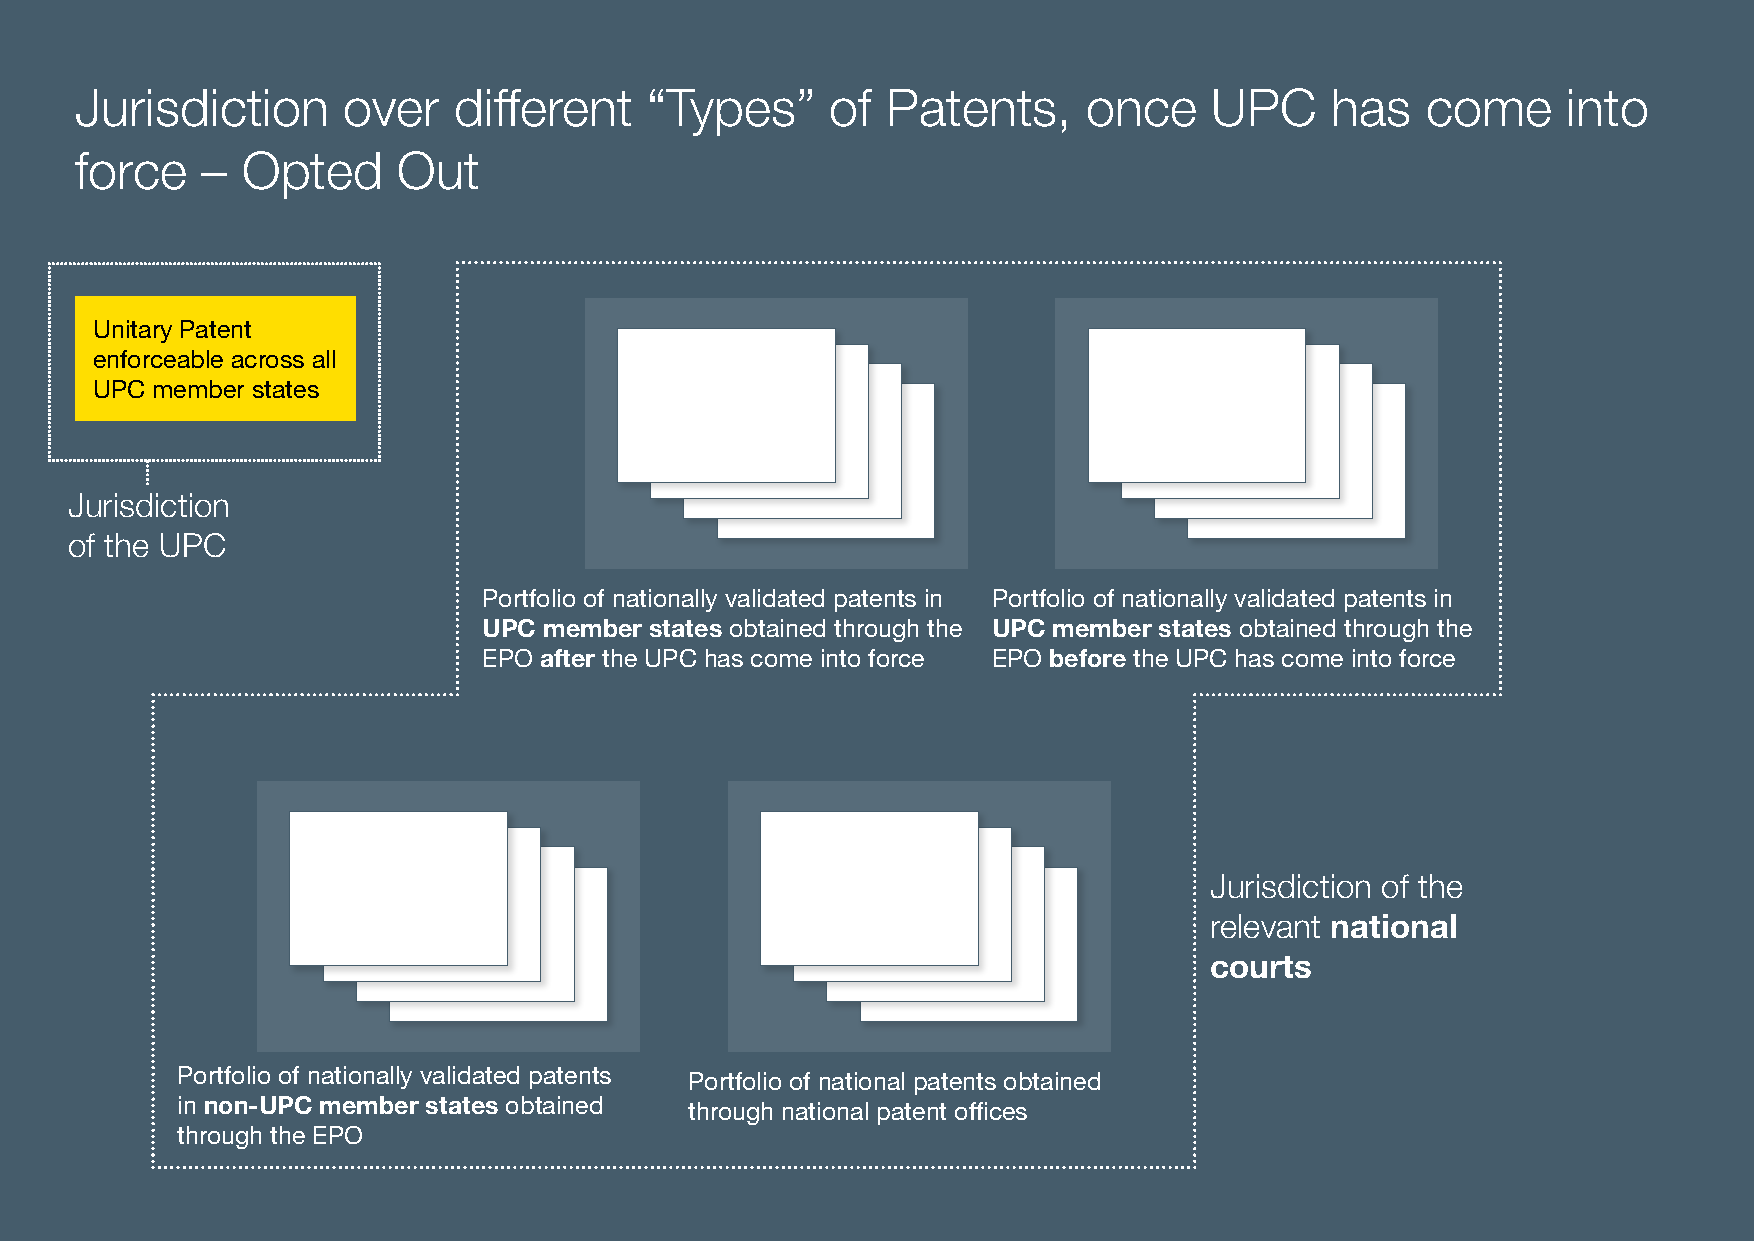 Jurisdiction over different "Types" of Patents, once UPC has come into force - Opted Out